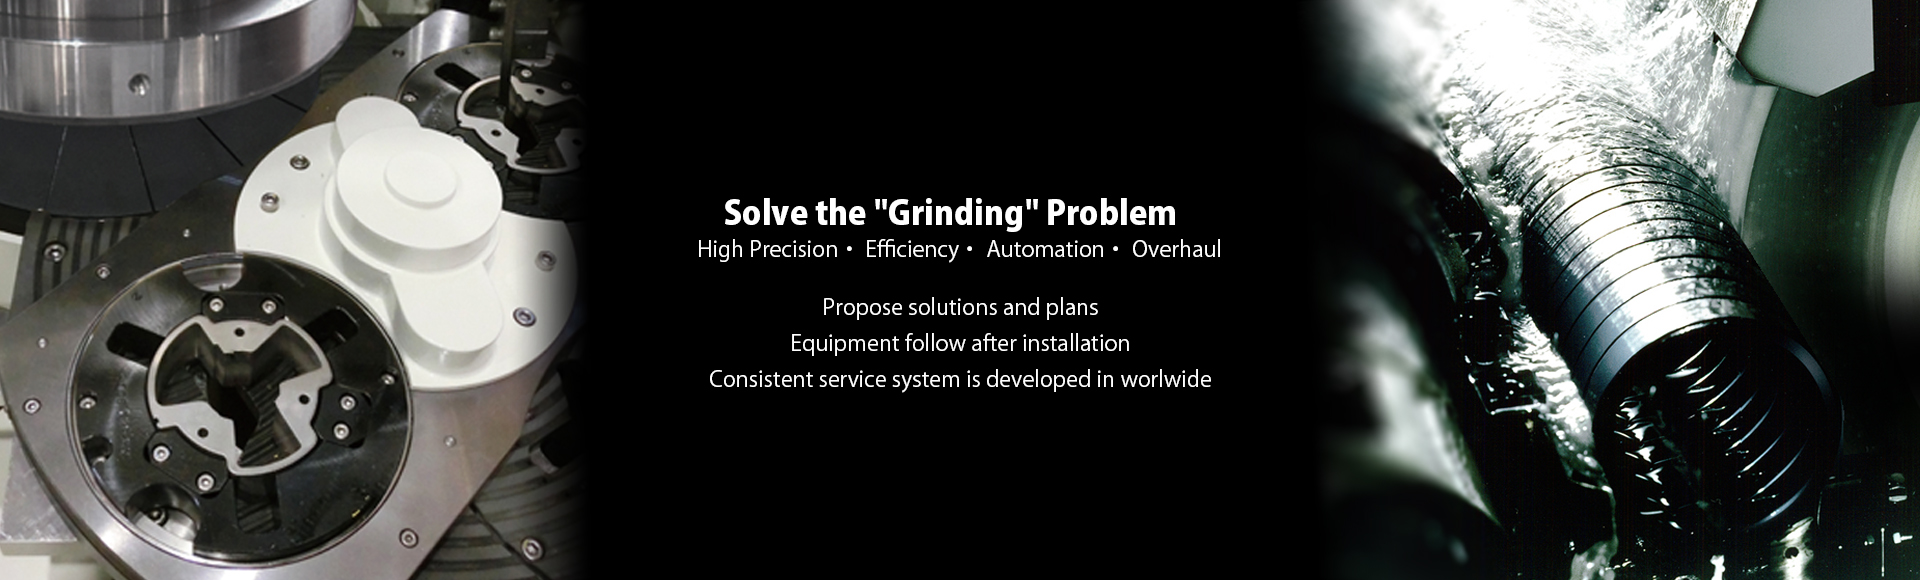 Solving grinding issues: High precision, efficiency, automation, and overhaul.